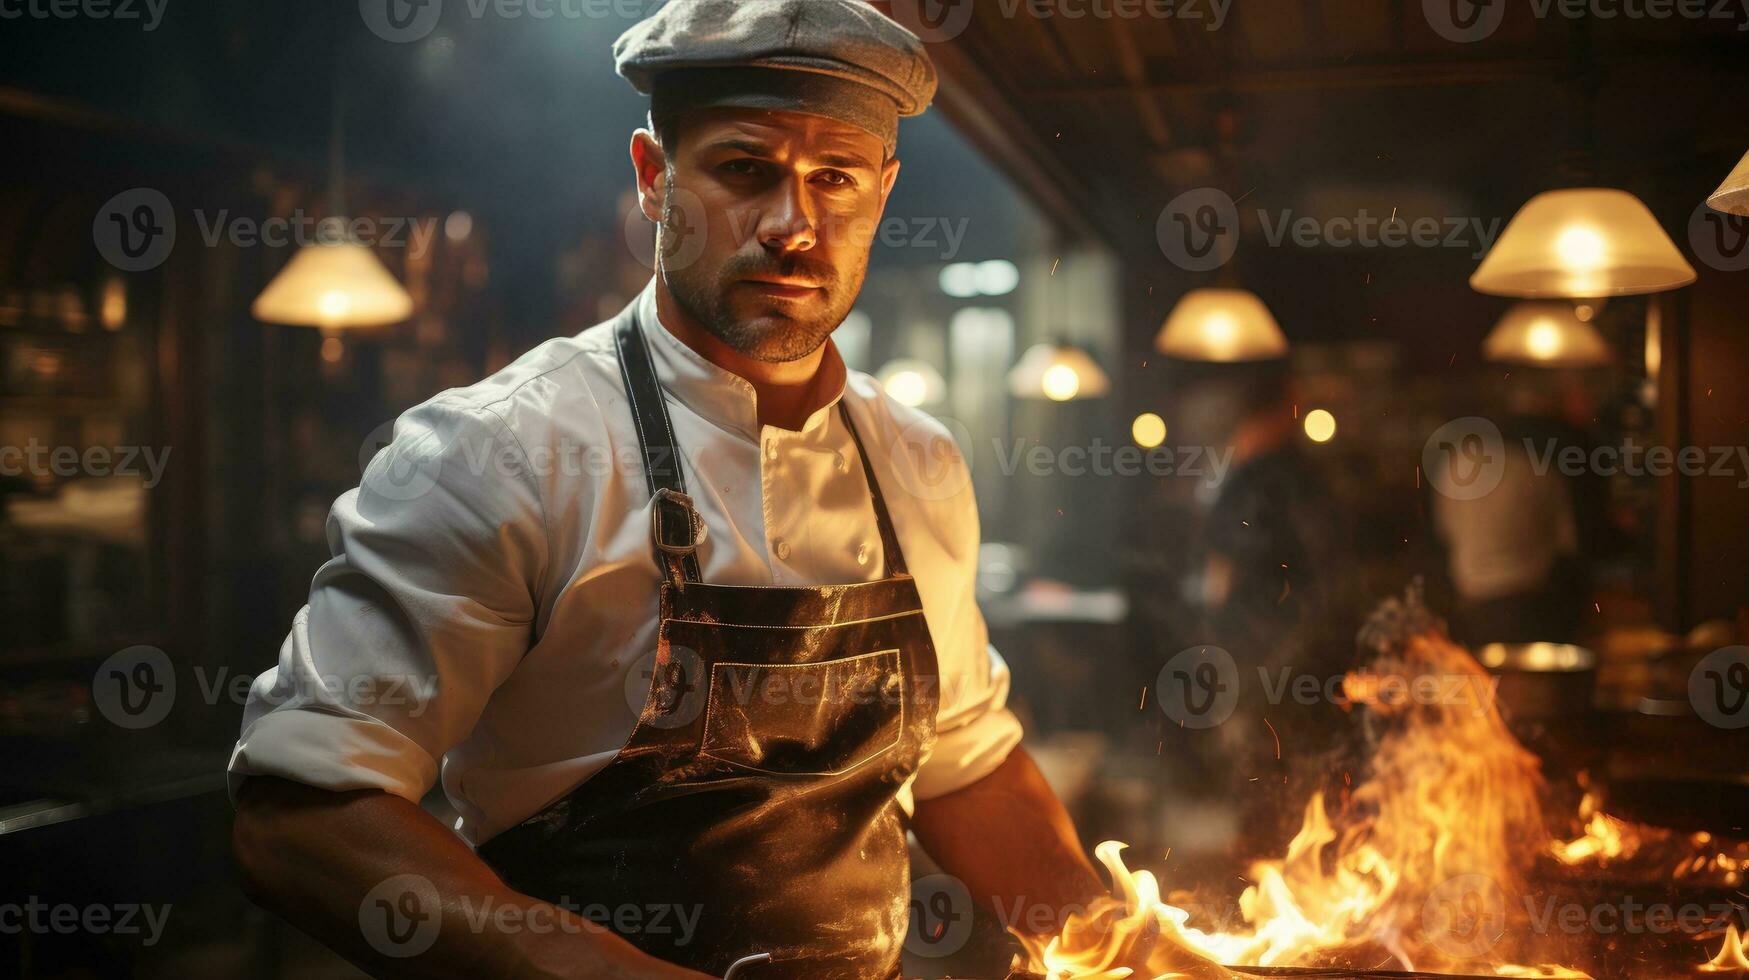 Dedicated Chef Mastering the Flames in Intense Kitchen Scene photo